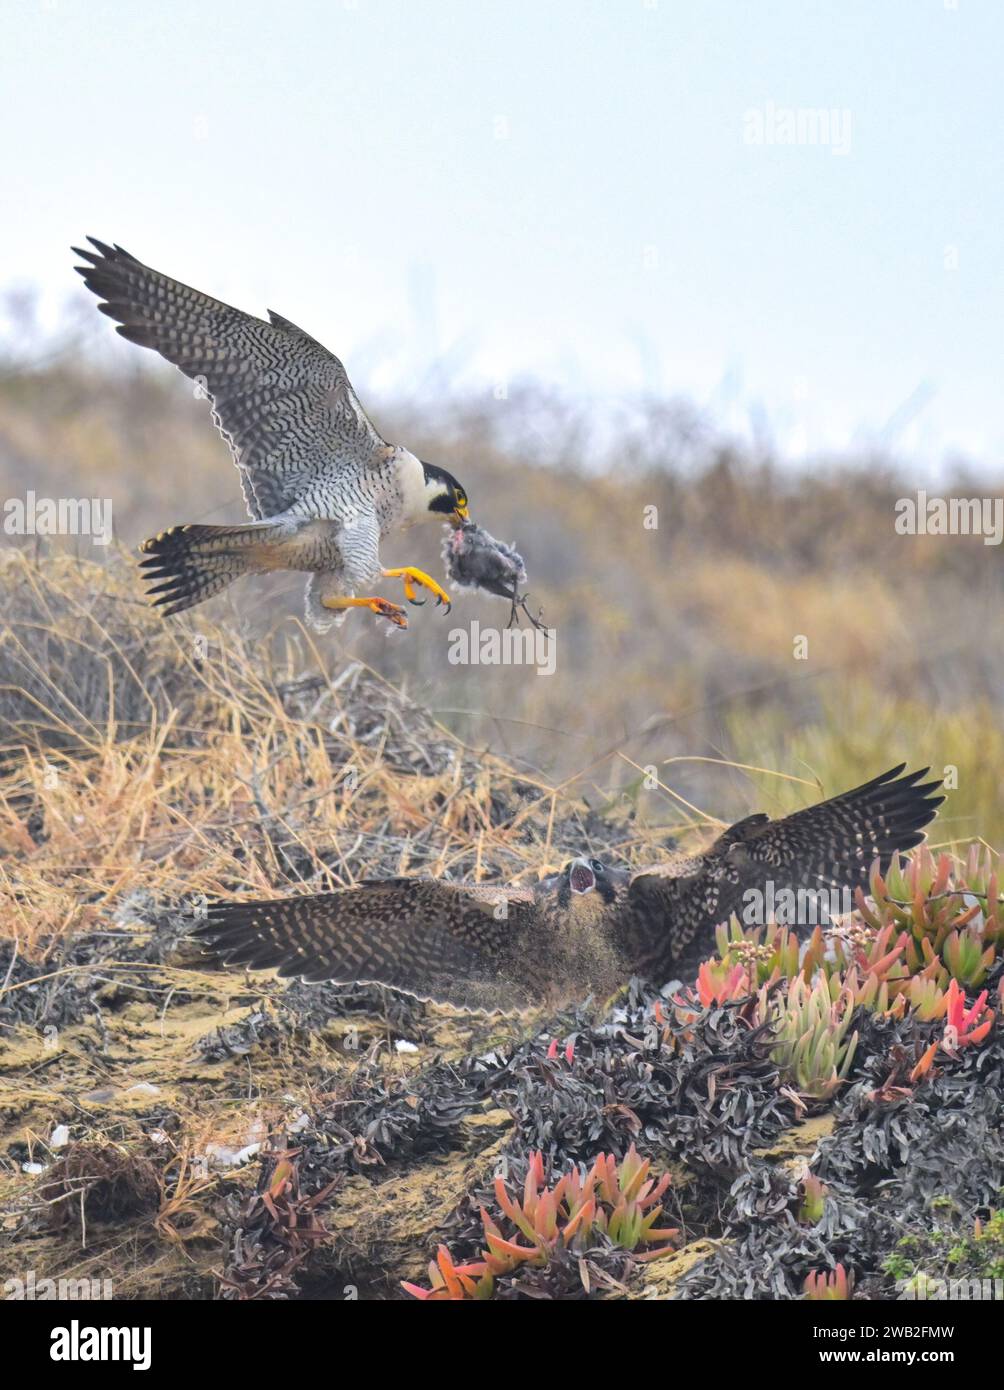 Mum brings food to the baby bird   USA EXCITING images of a mother peregrine falcon enticing its fledgling with food in a bid to teach it to hunt were Stock Photo